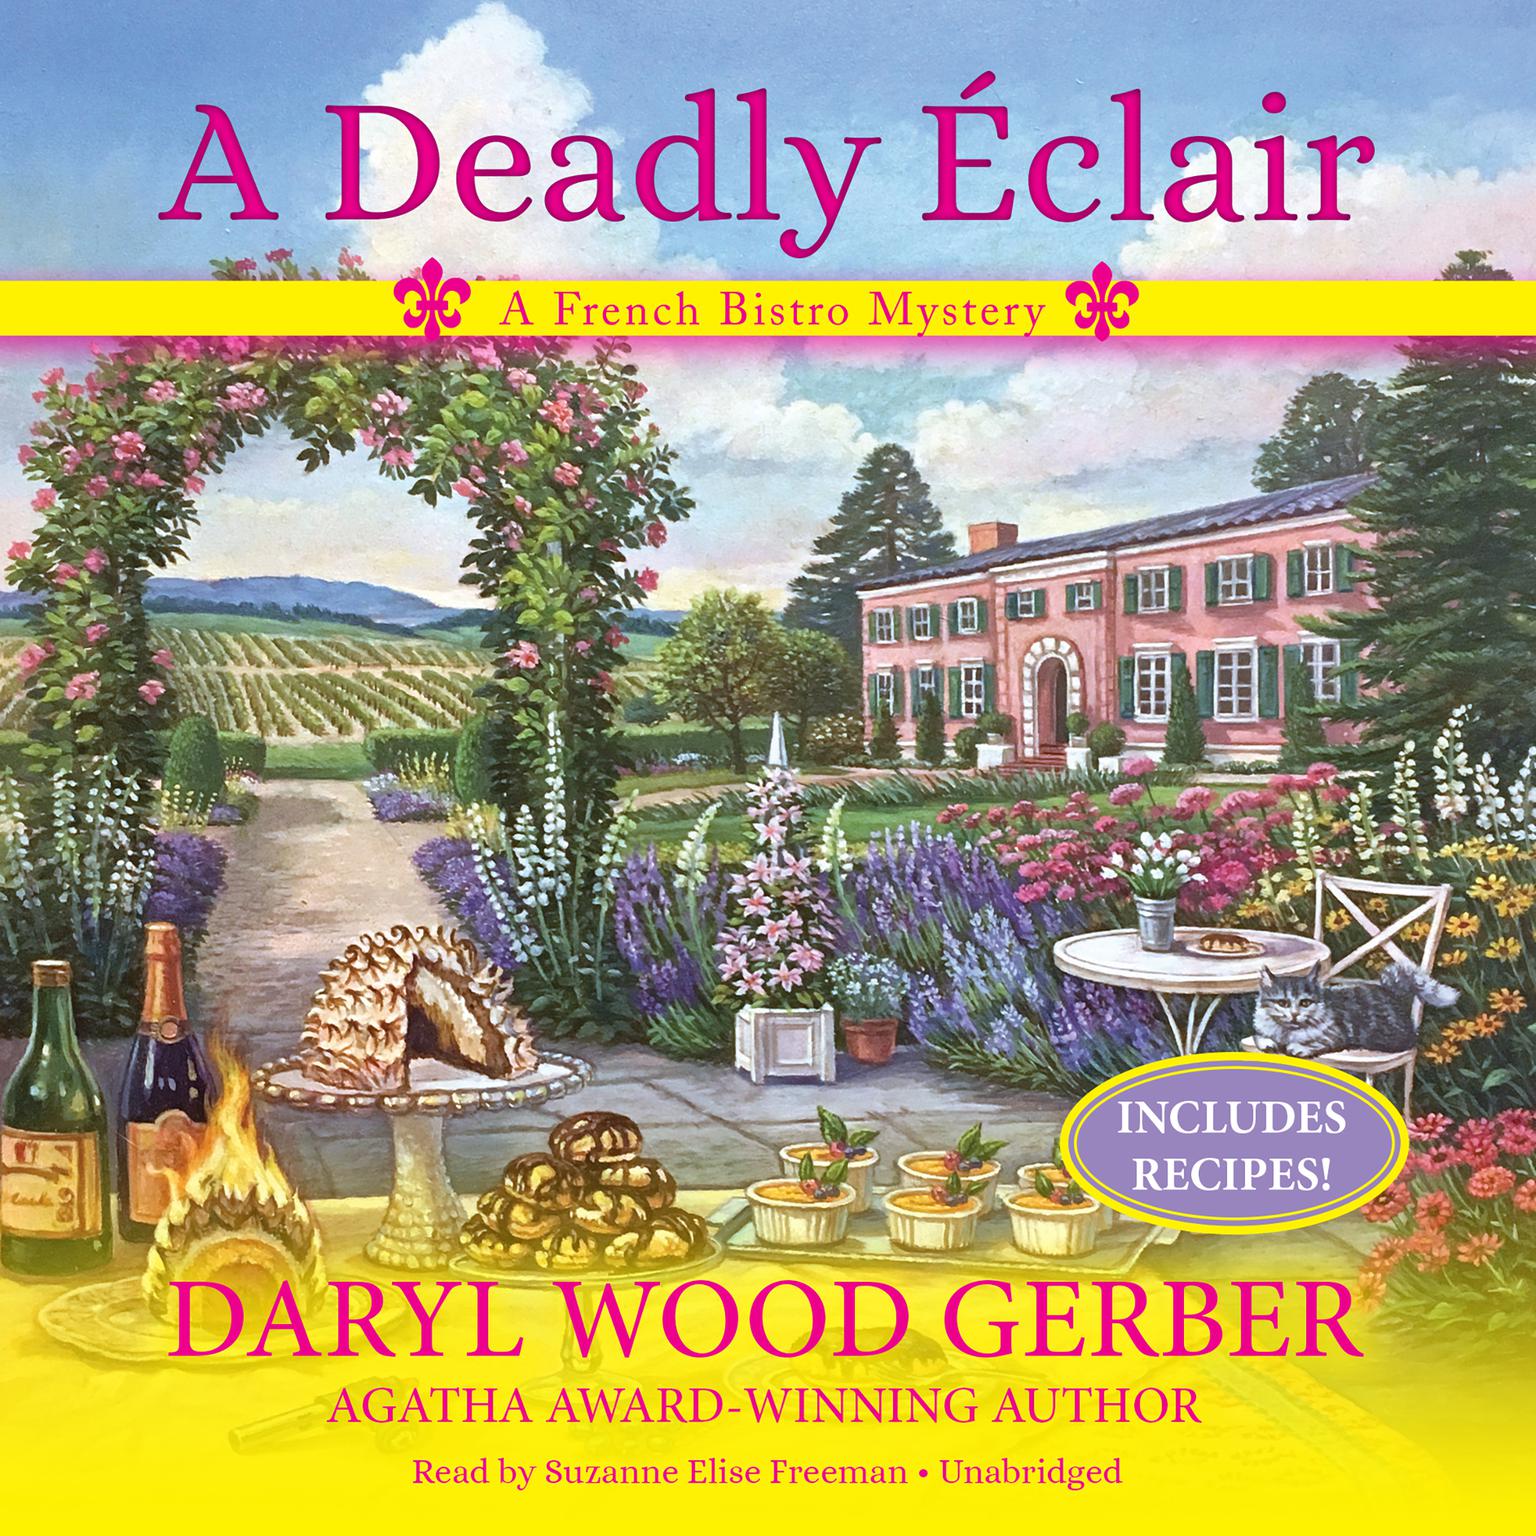 A Deadly Éclair: A French Bistro Mystery Audiobook, by Daryl Wood Gerber